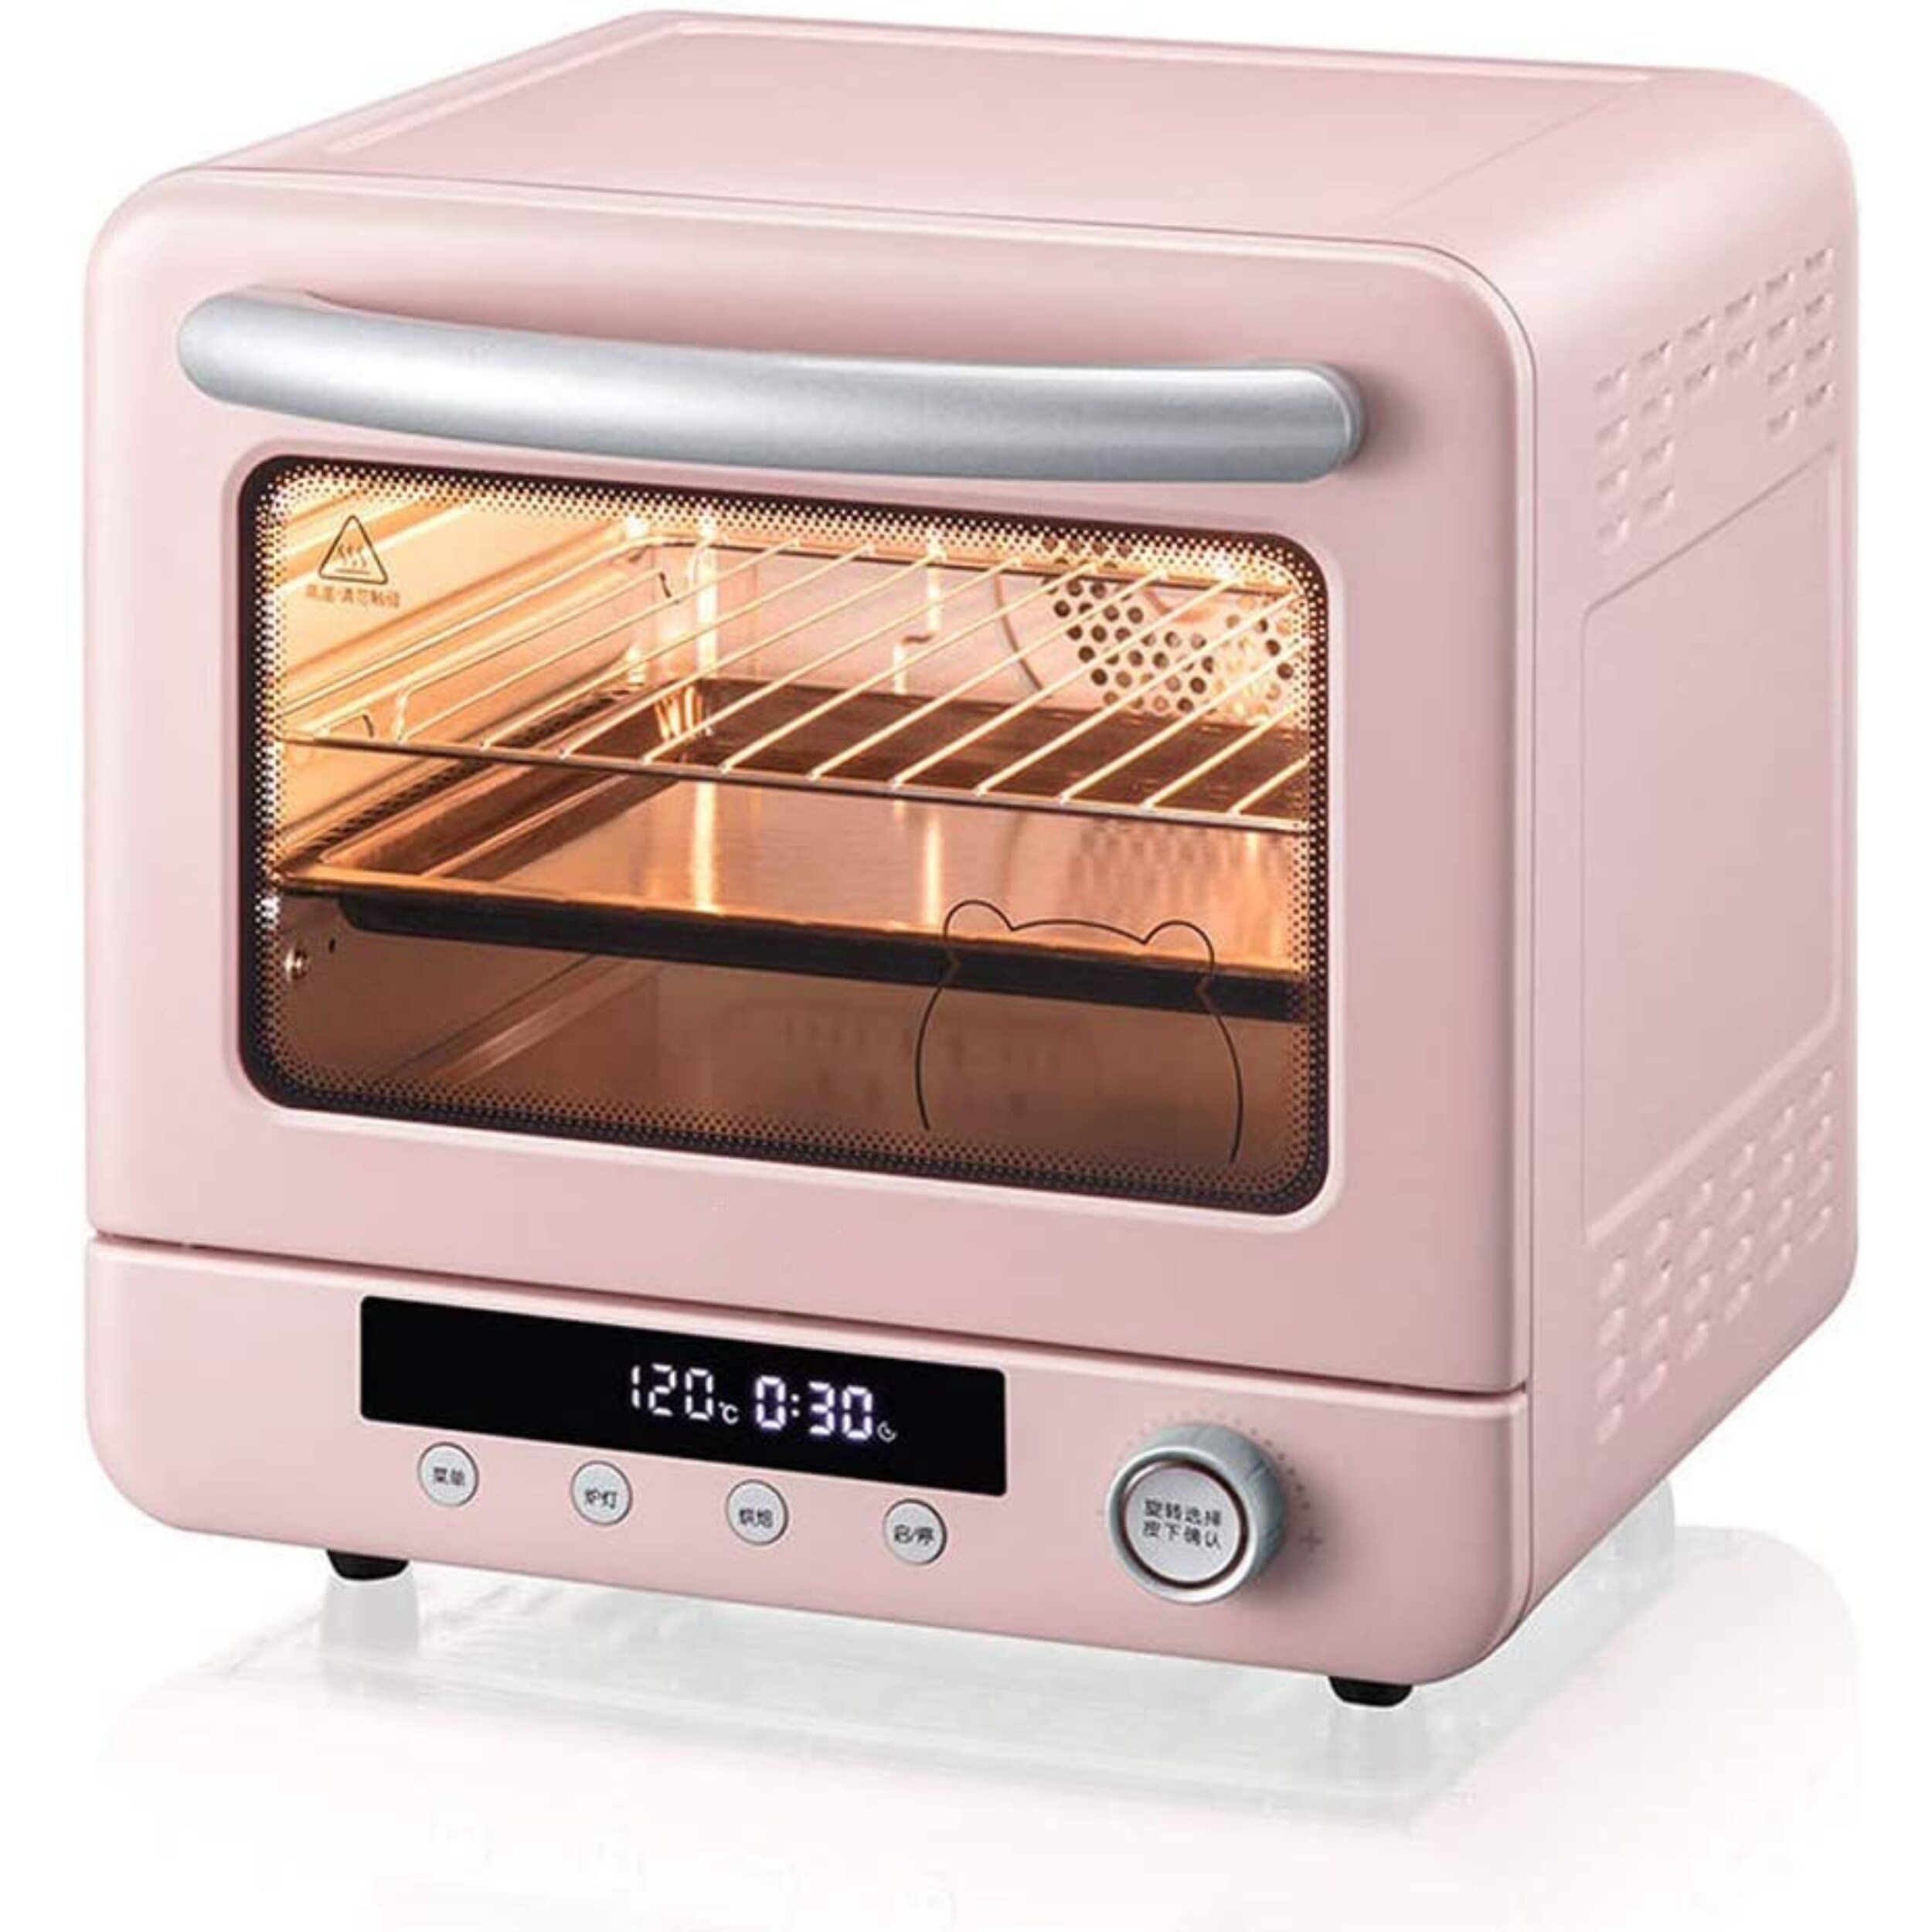 Multifunctional Electric Oven Cute Mini Small Oven Light Pink Toaster Oven  Electric Oven for Baking Bread Baking Ovens